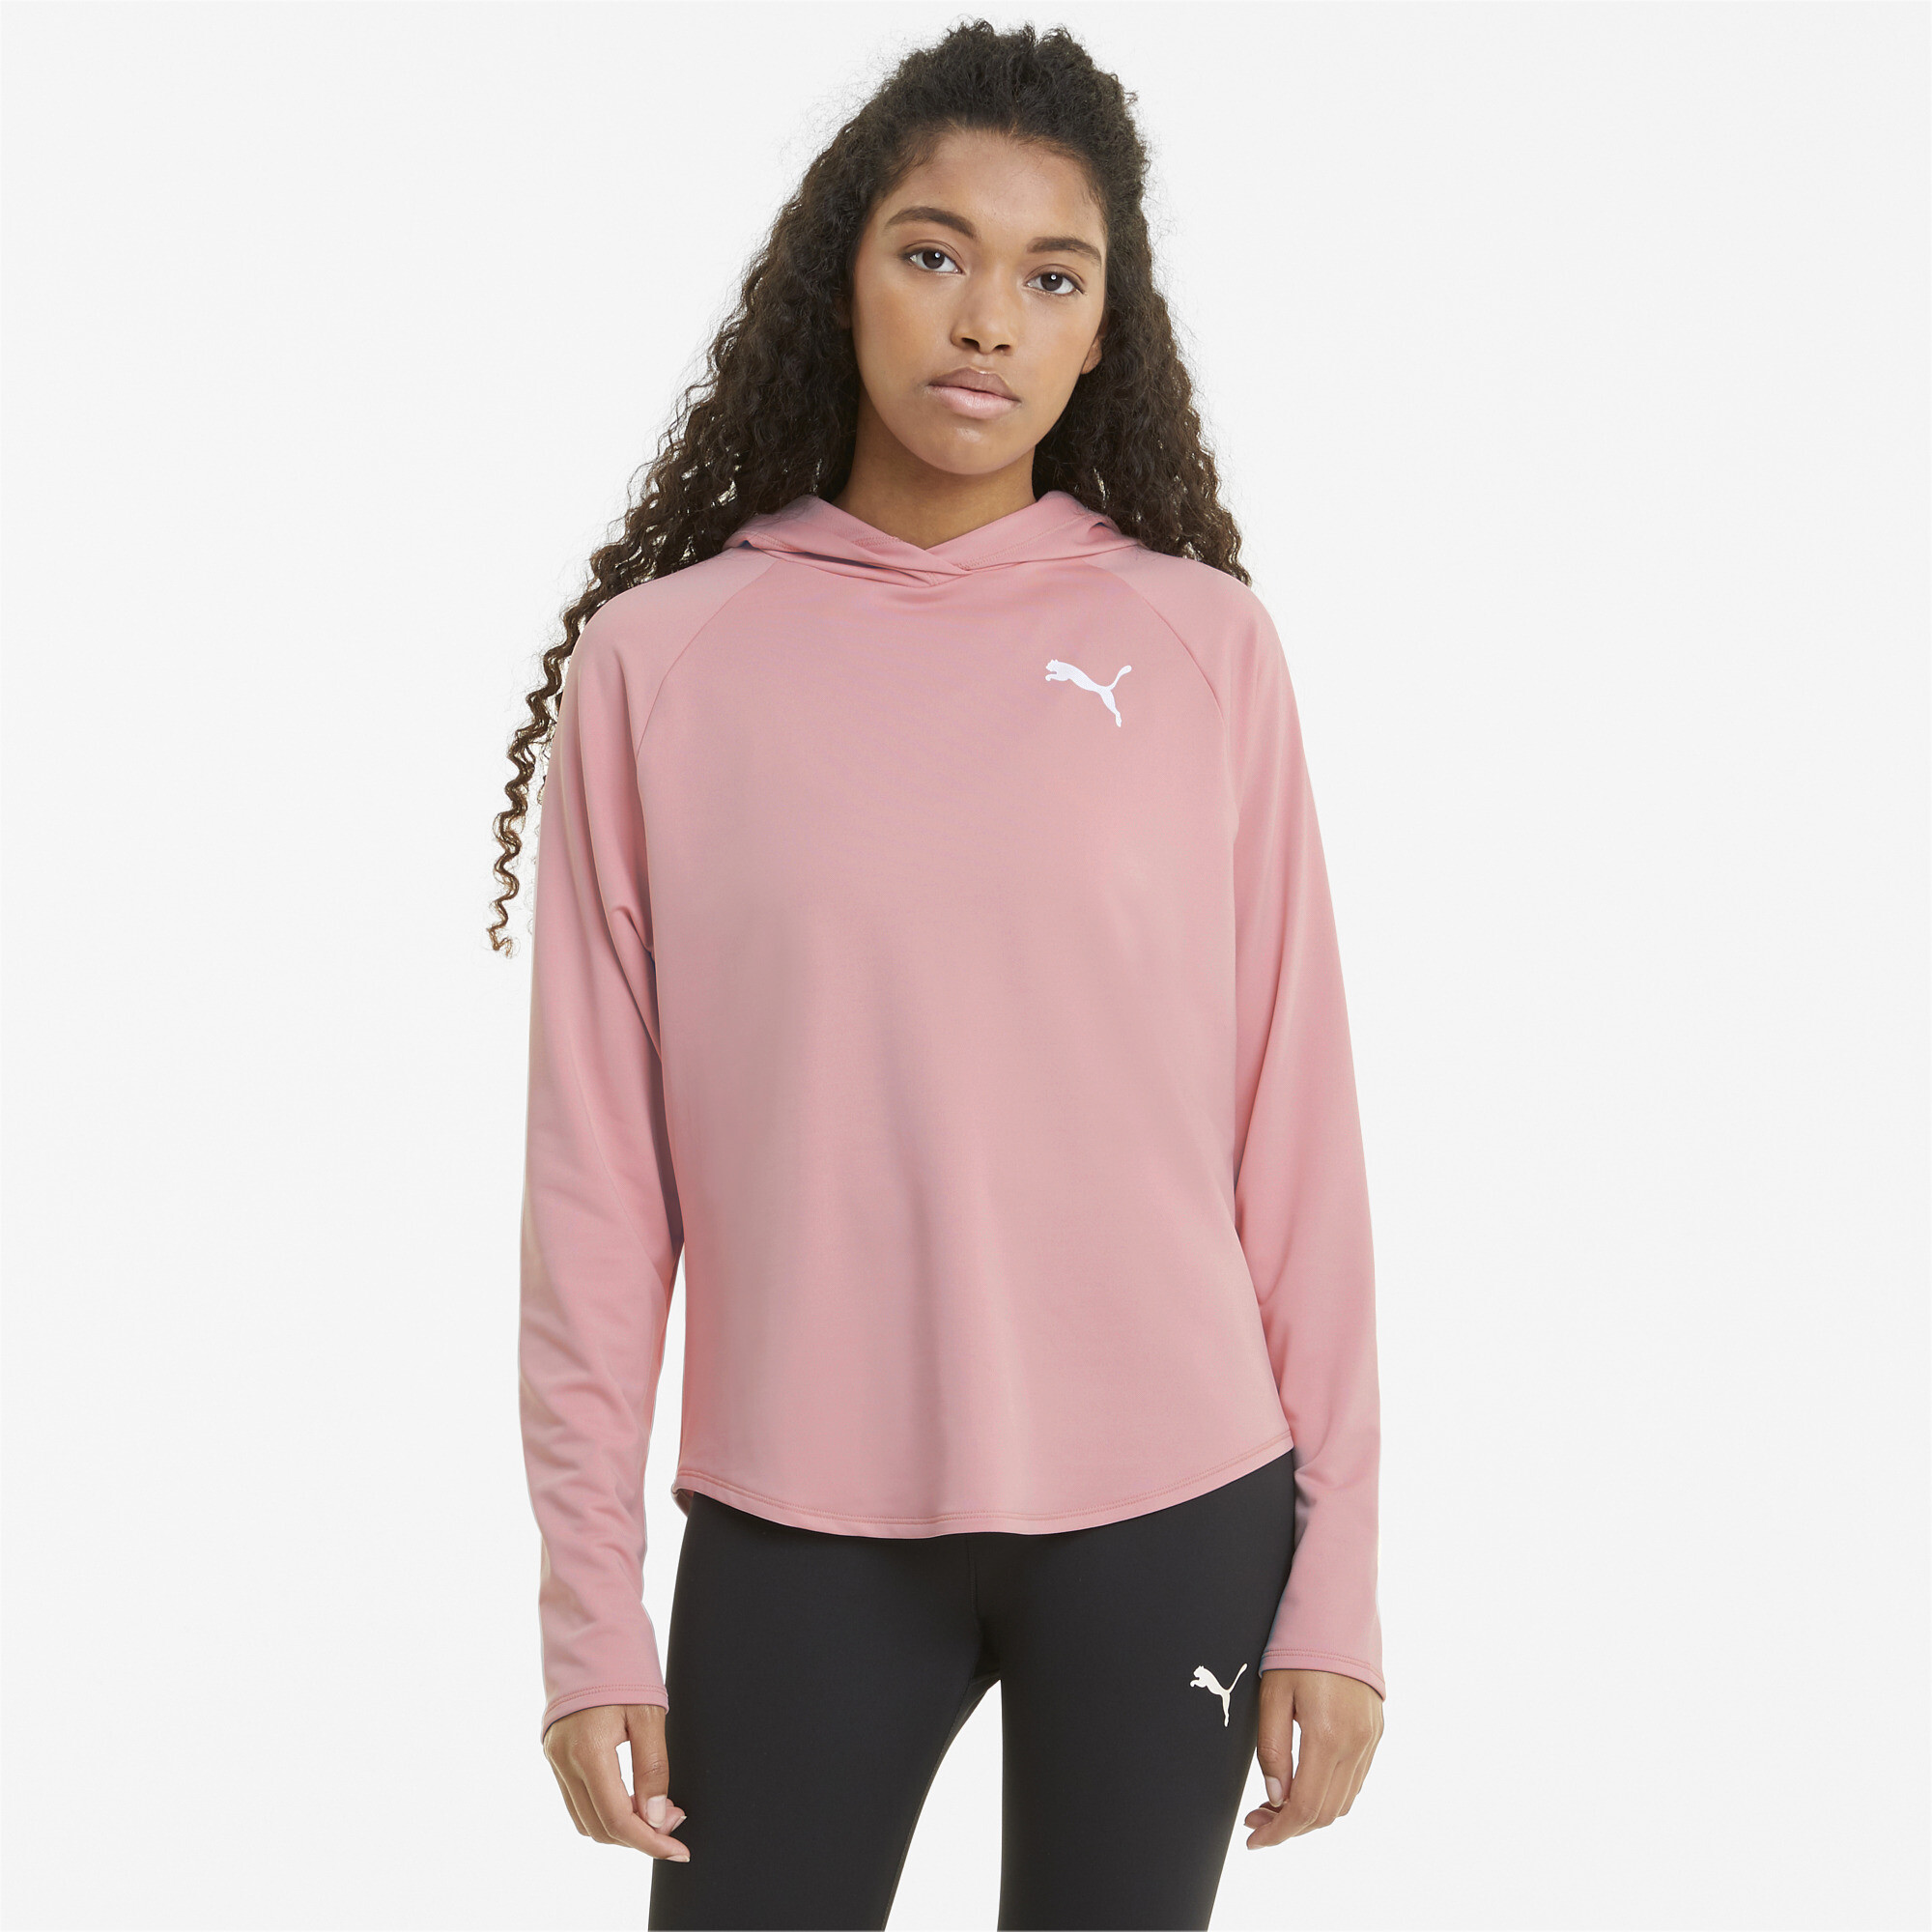 Women's Puma Active's Hoodie, Pink, Size XXL, Clothing